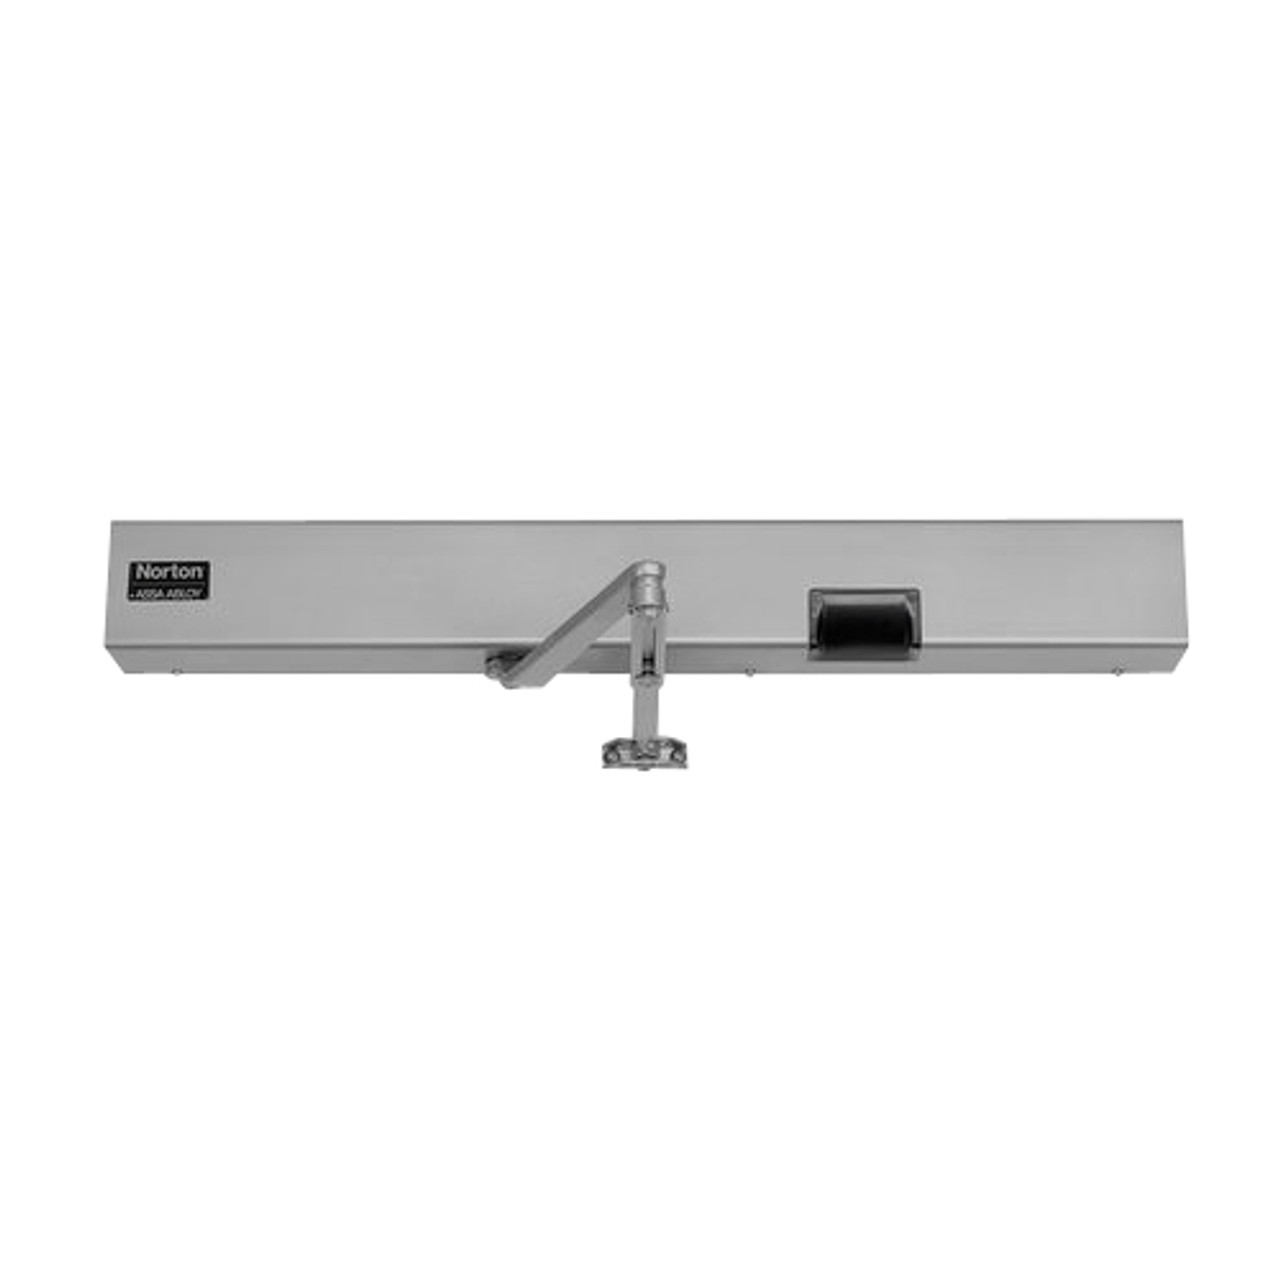 7132SZ-LH-120VAC-689 Norton 7100SZ Series Safe Zone Multi-Point Closer/Holder with Motion Sensor and Push Side Double Lever 13-1/2 inch Main Arm in Aluminum Finish